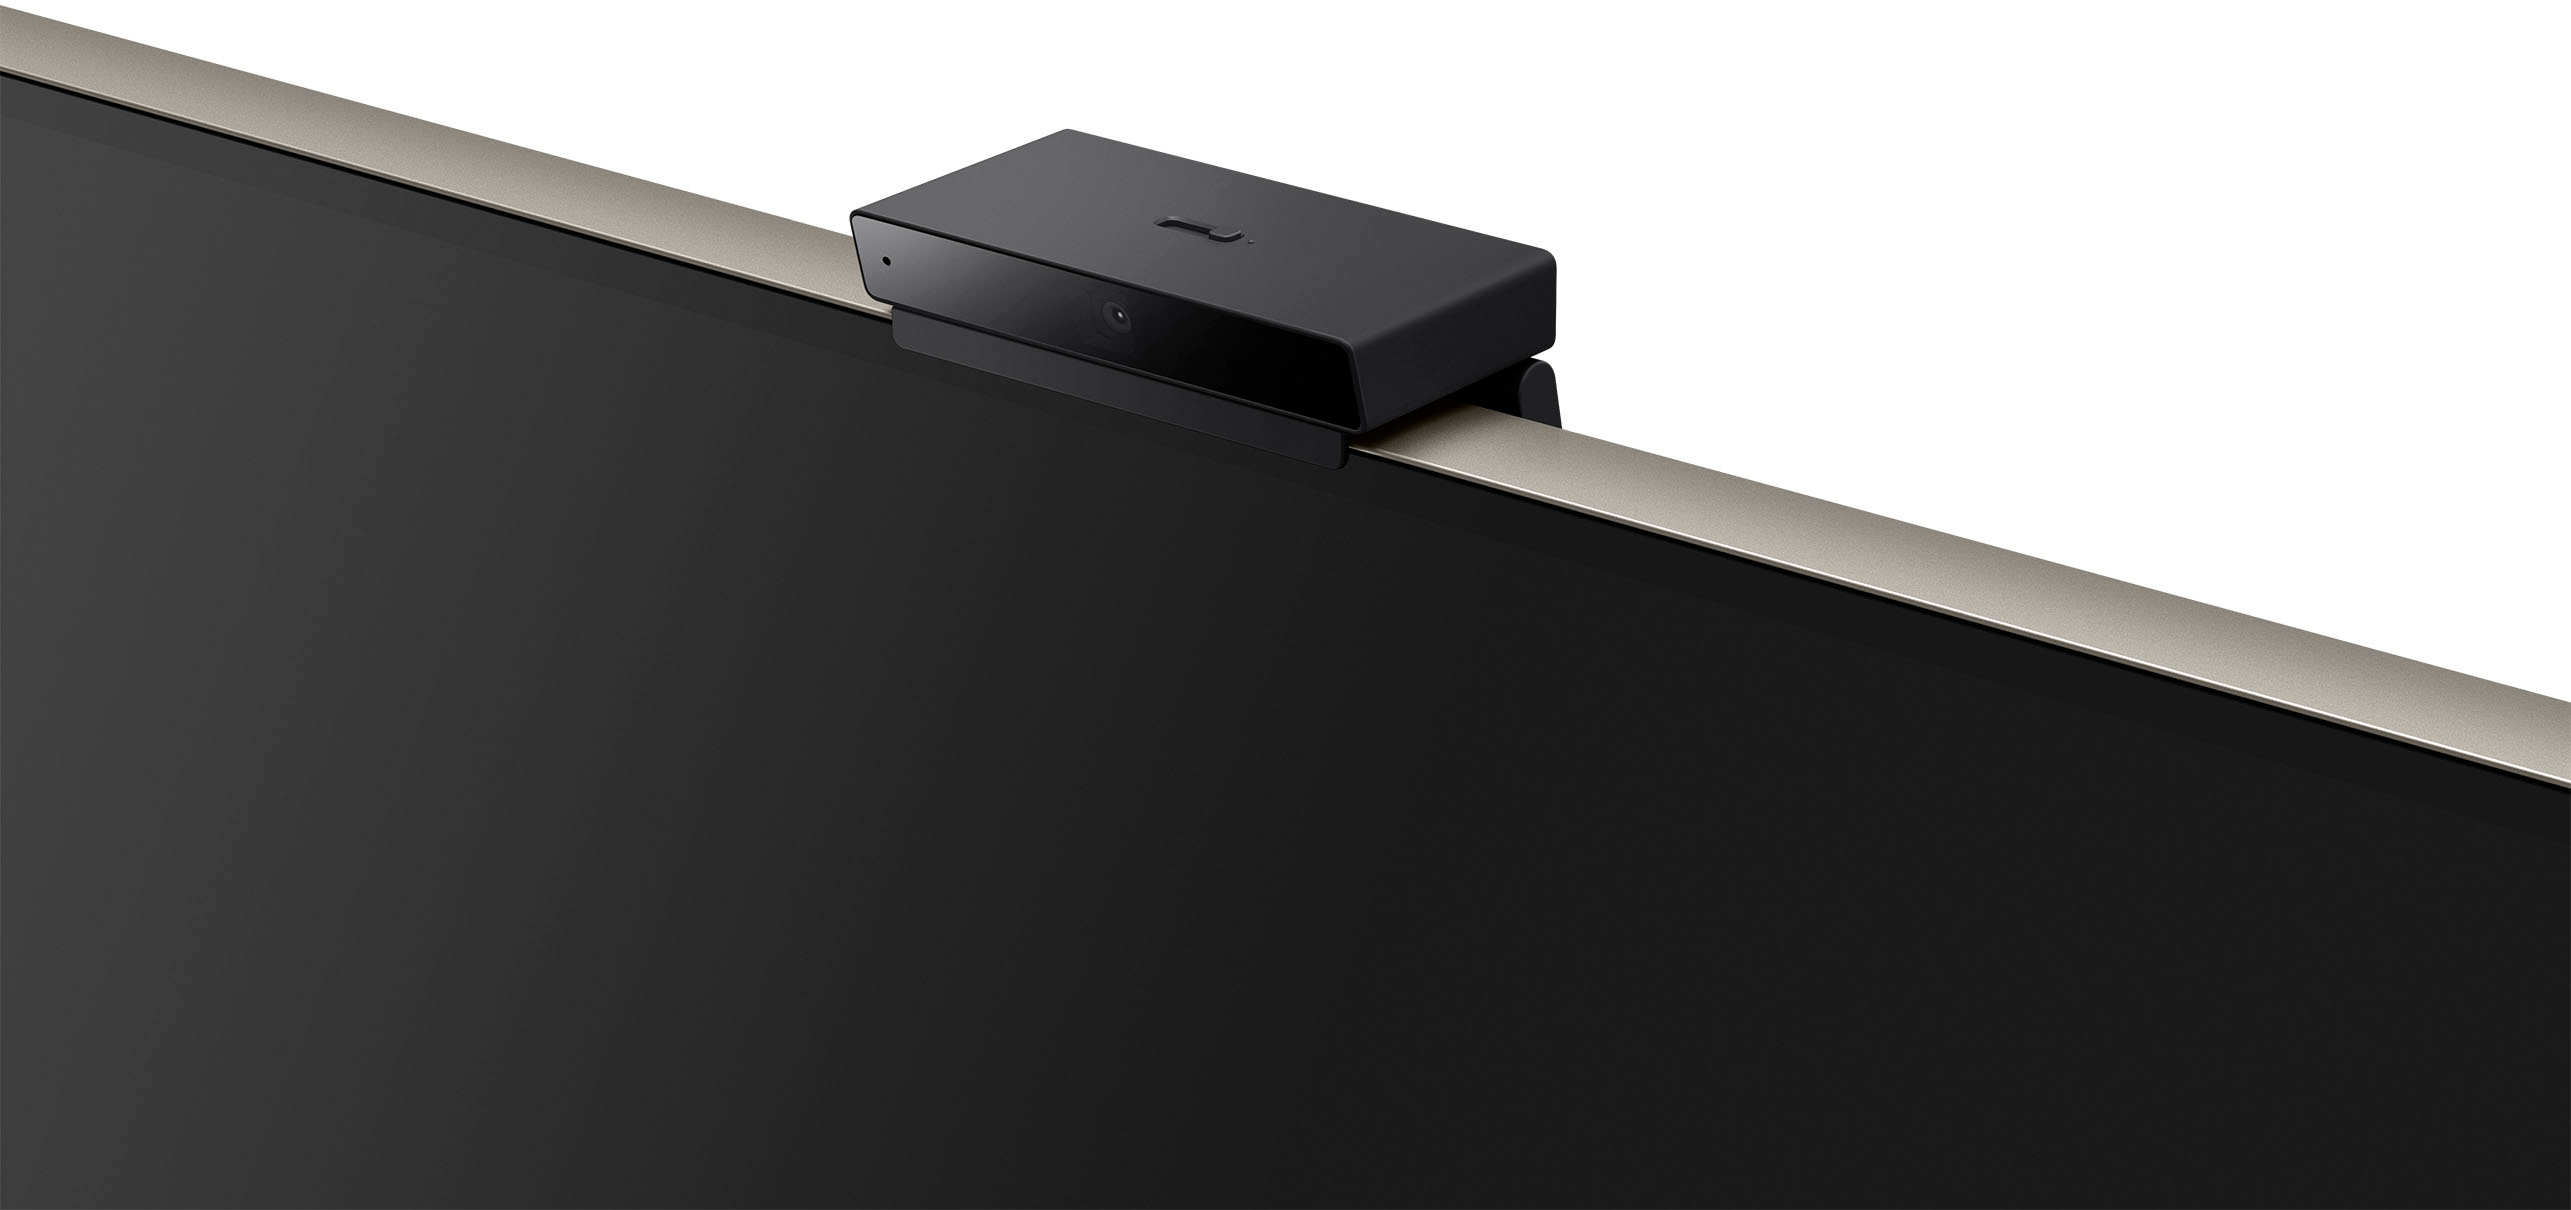 Sony  BRAVIA® Cam – Product Overview 